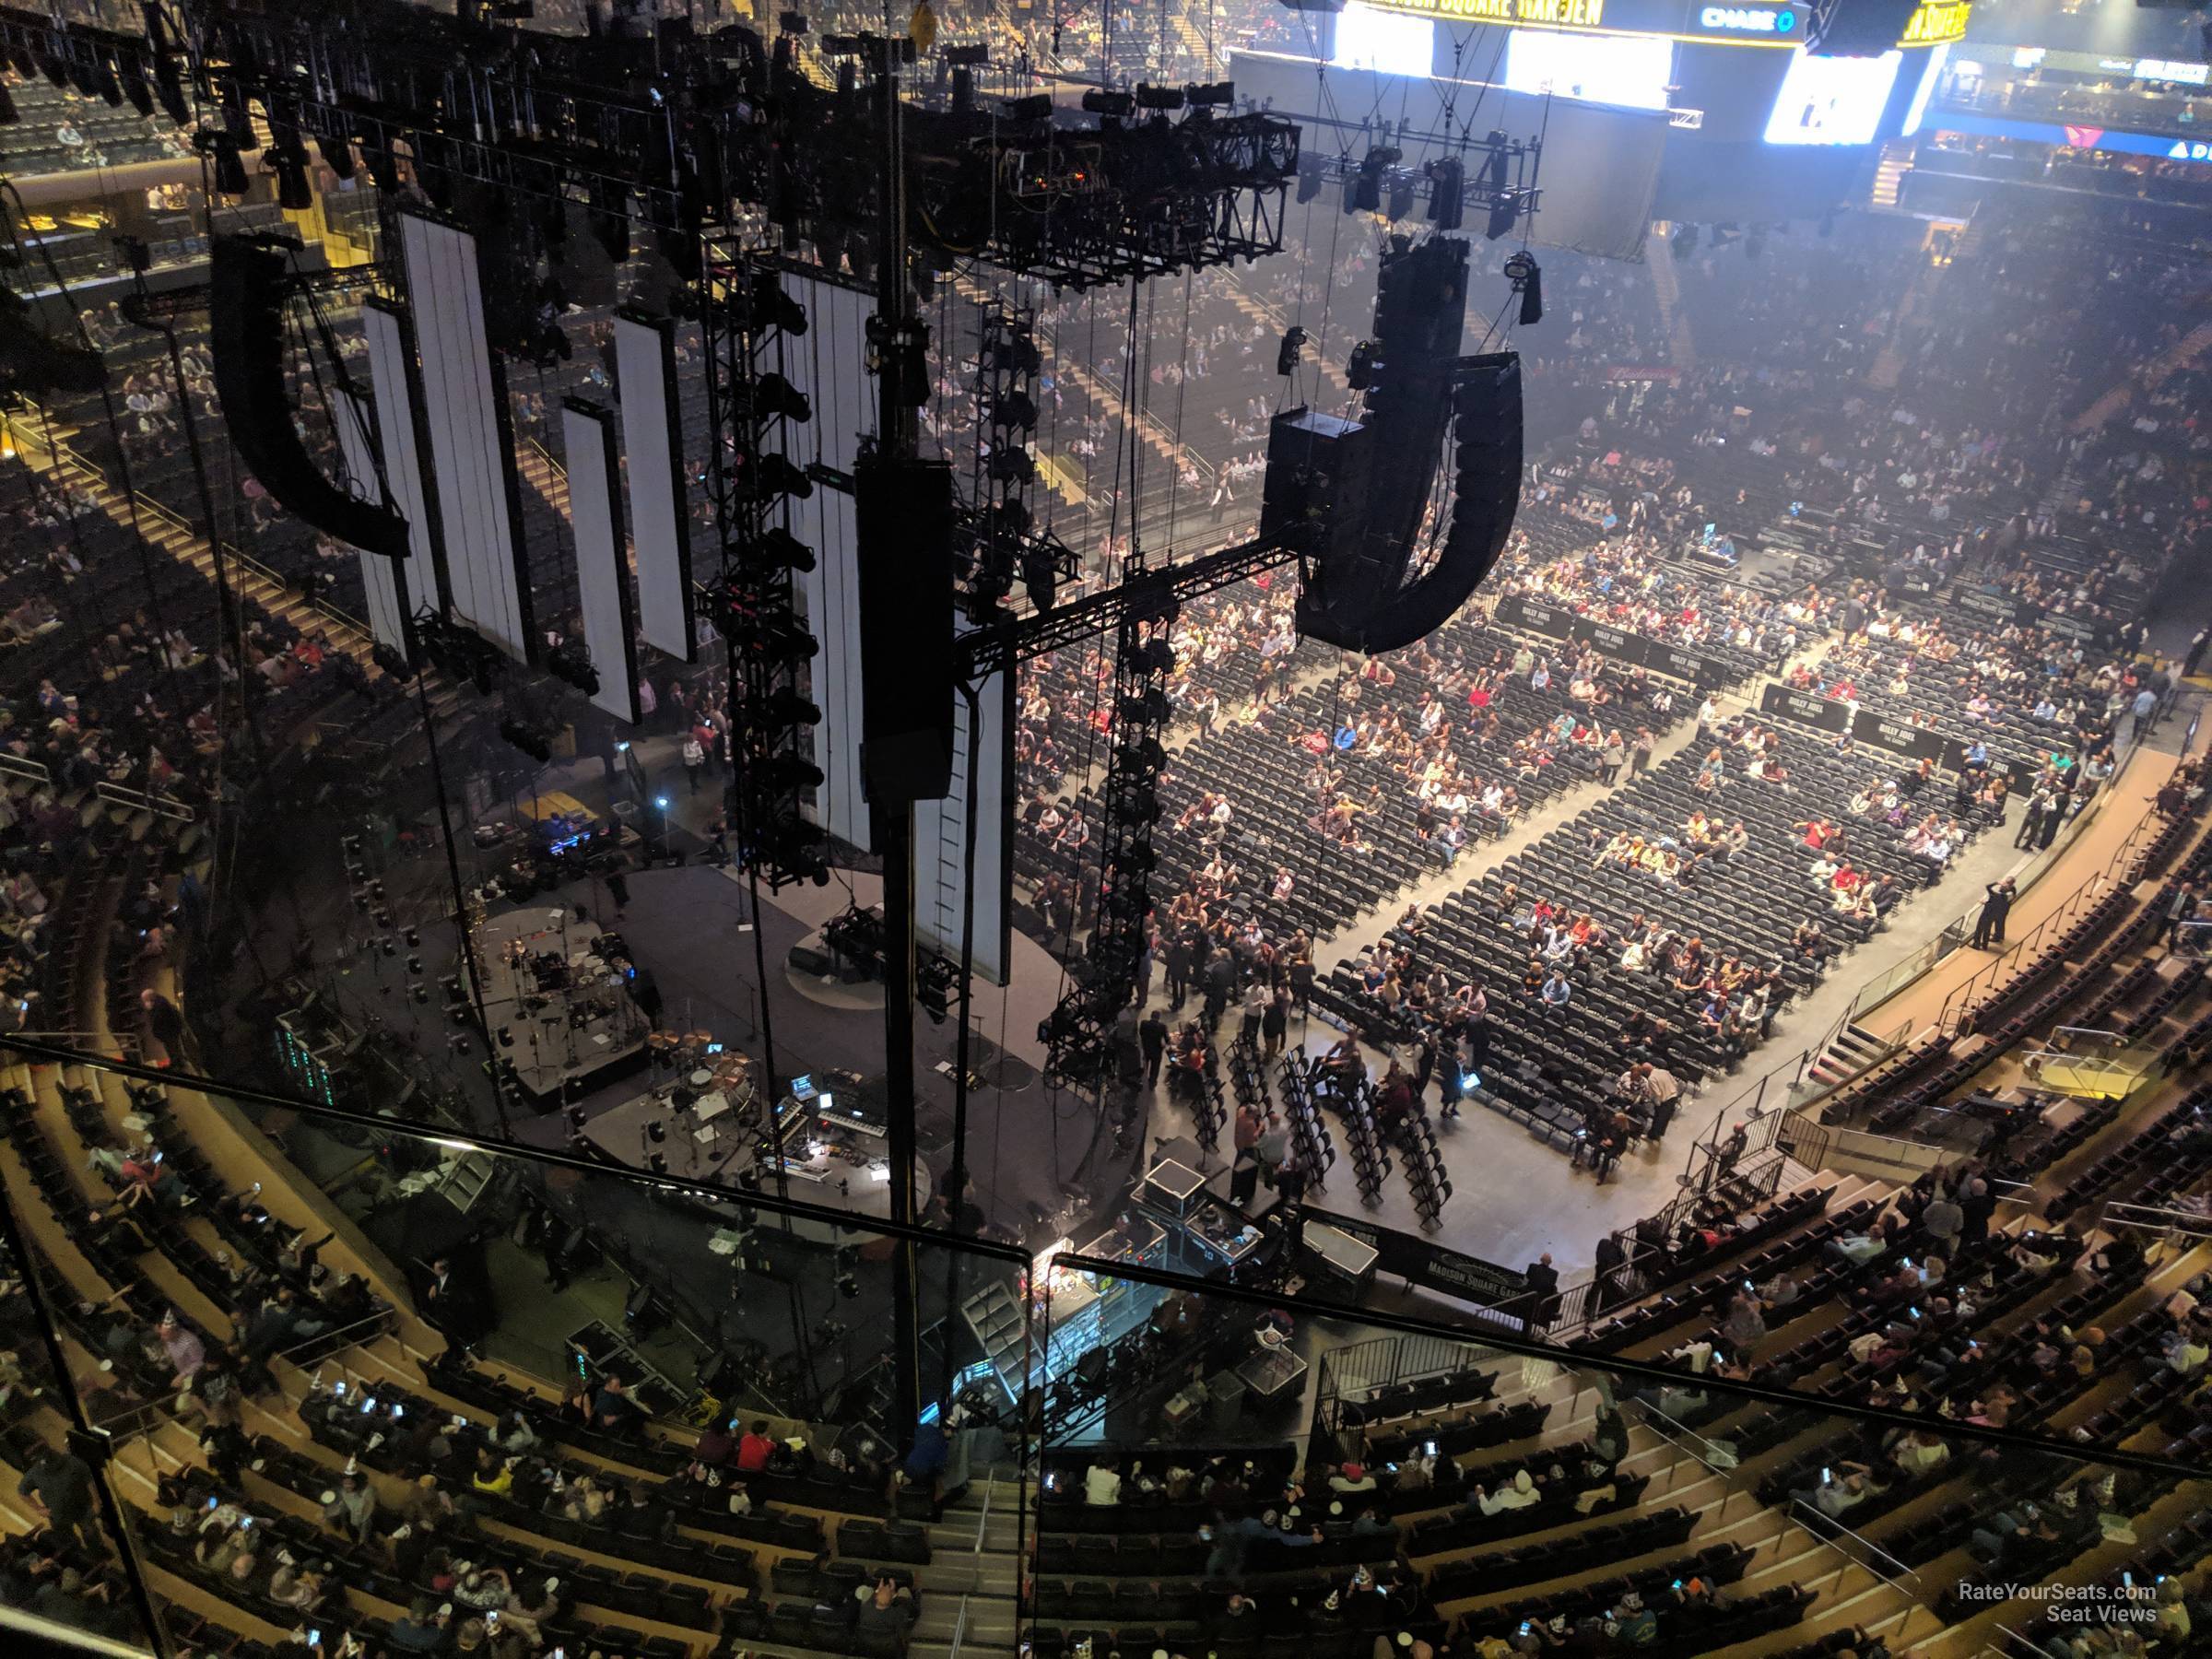 section 322, row 2 seat view  for concert - madison square garden